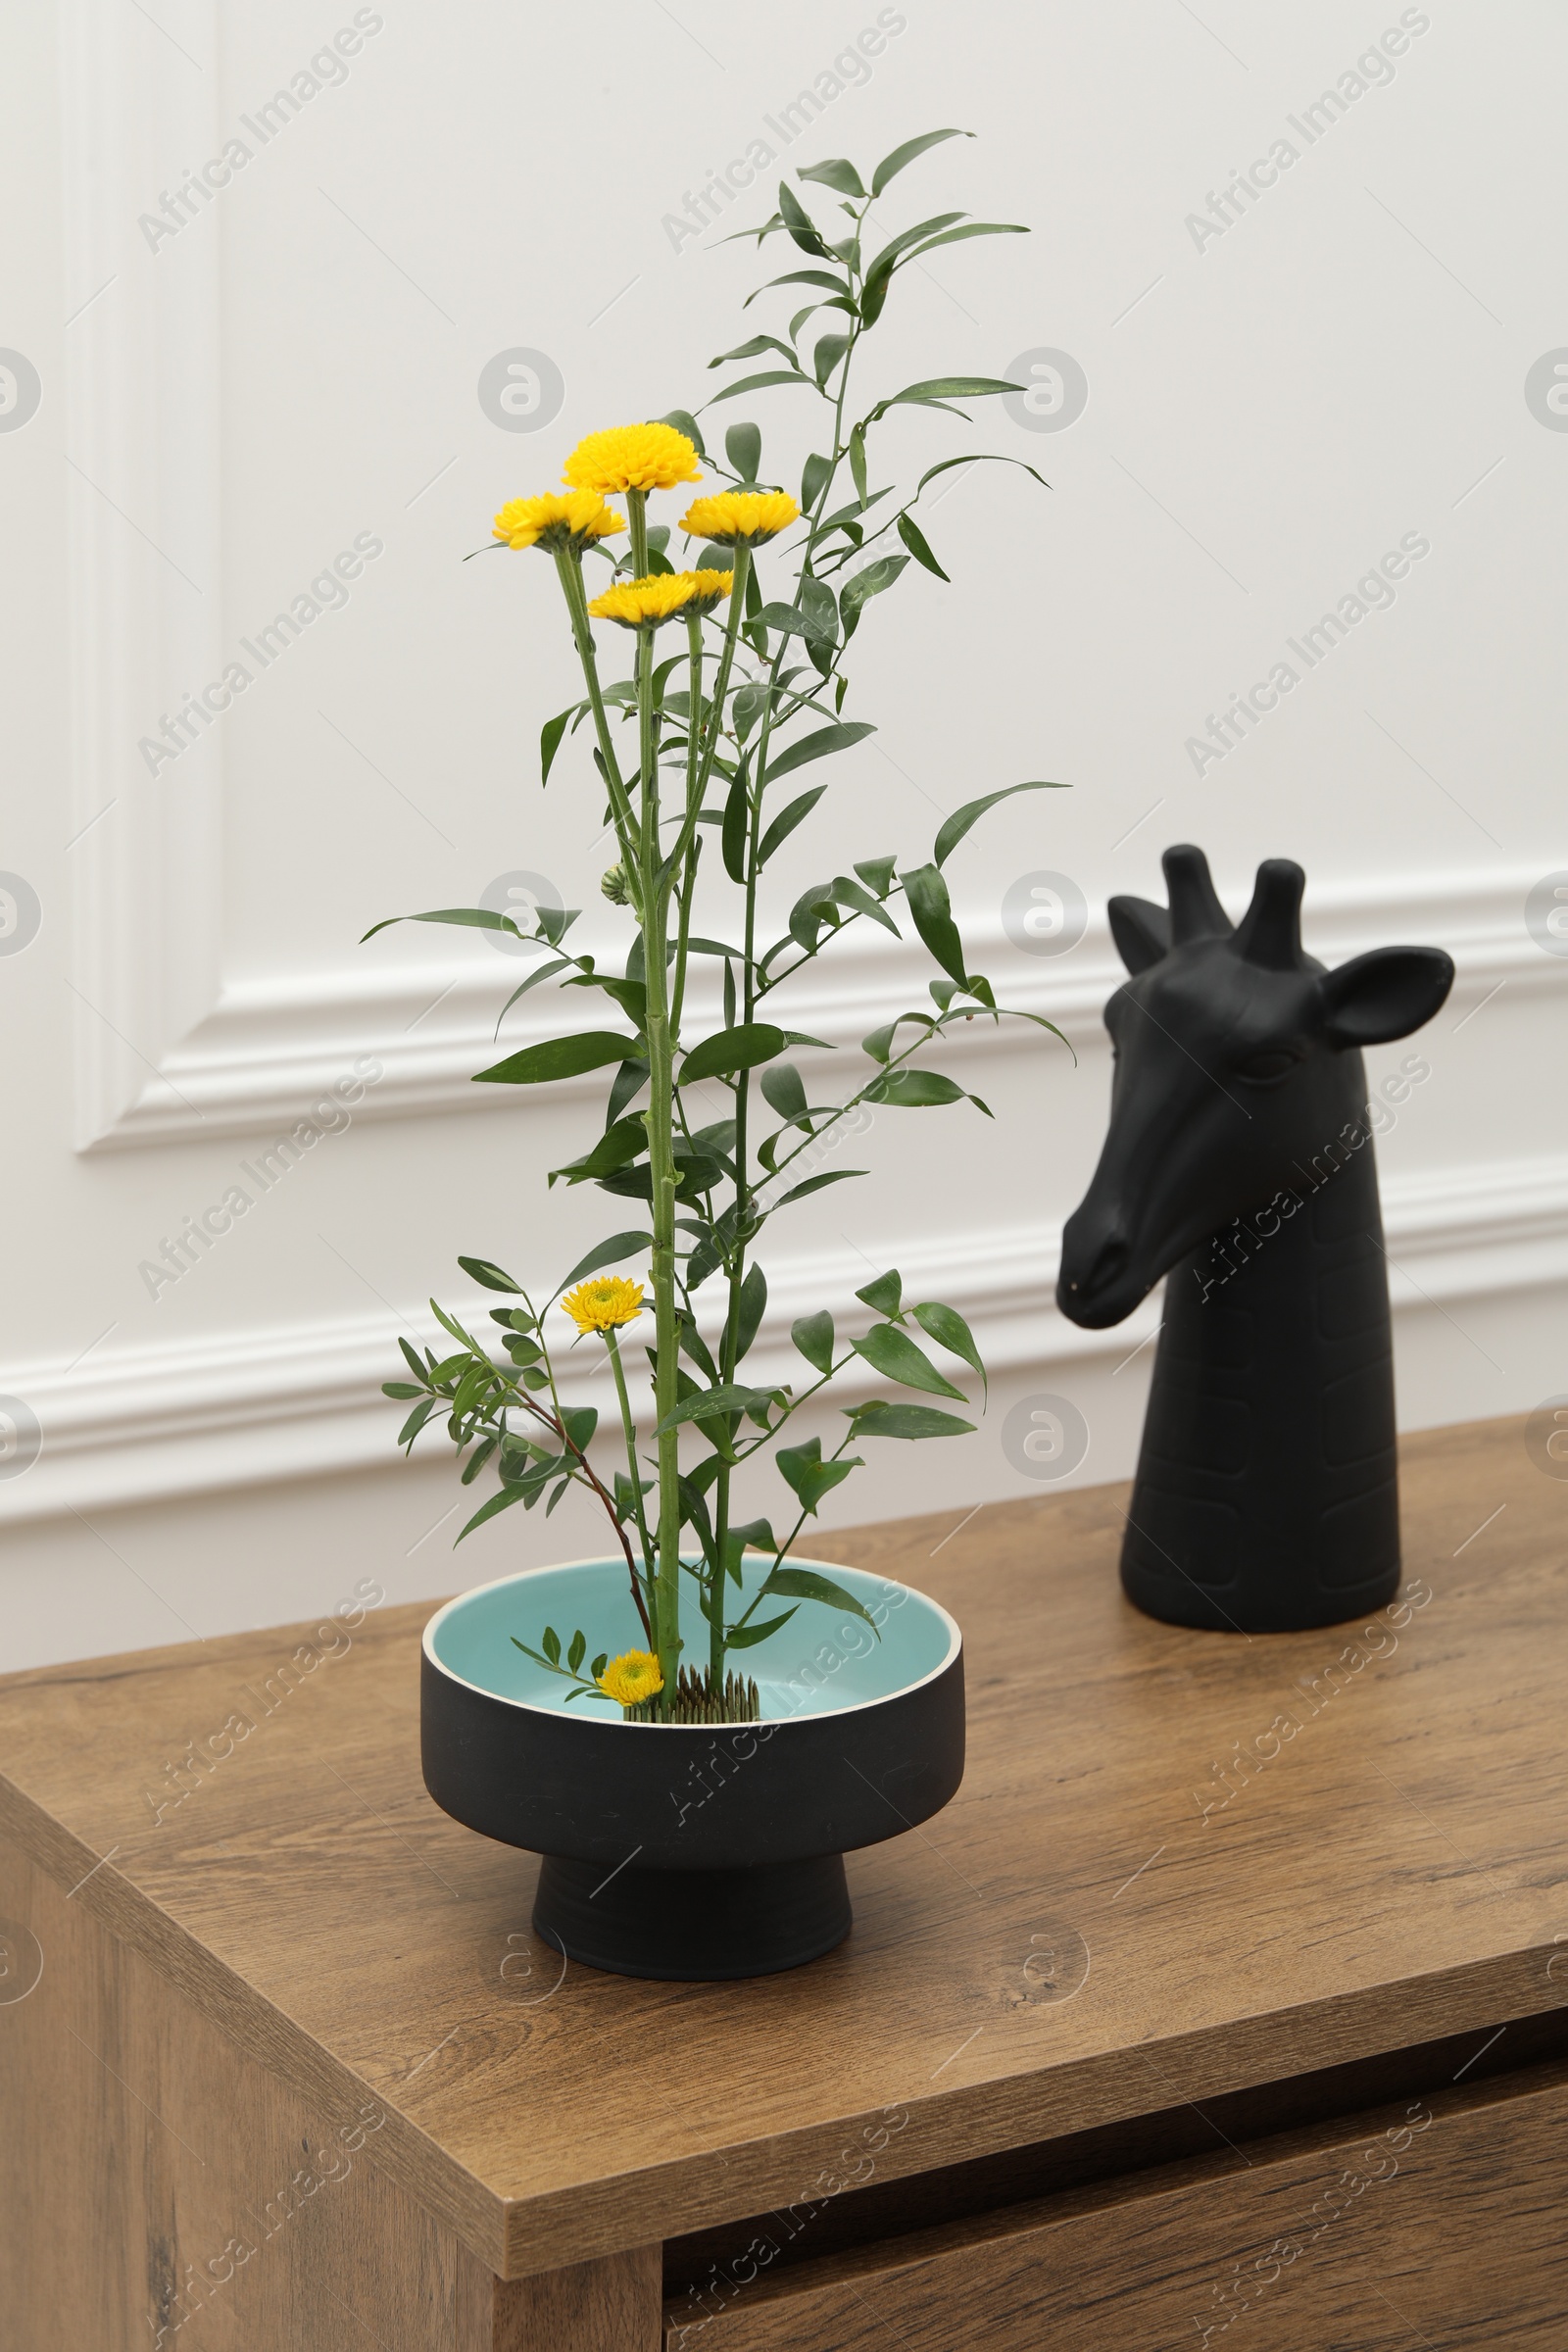 Photo of Stylish ikebana with beautiful yellow flowers, green branch and decor carrying cozy atmosphere at home